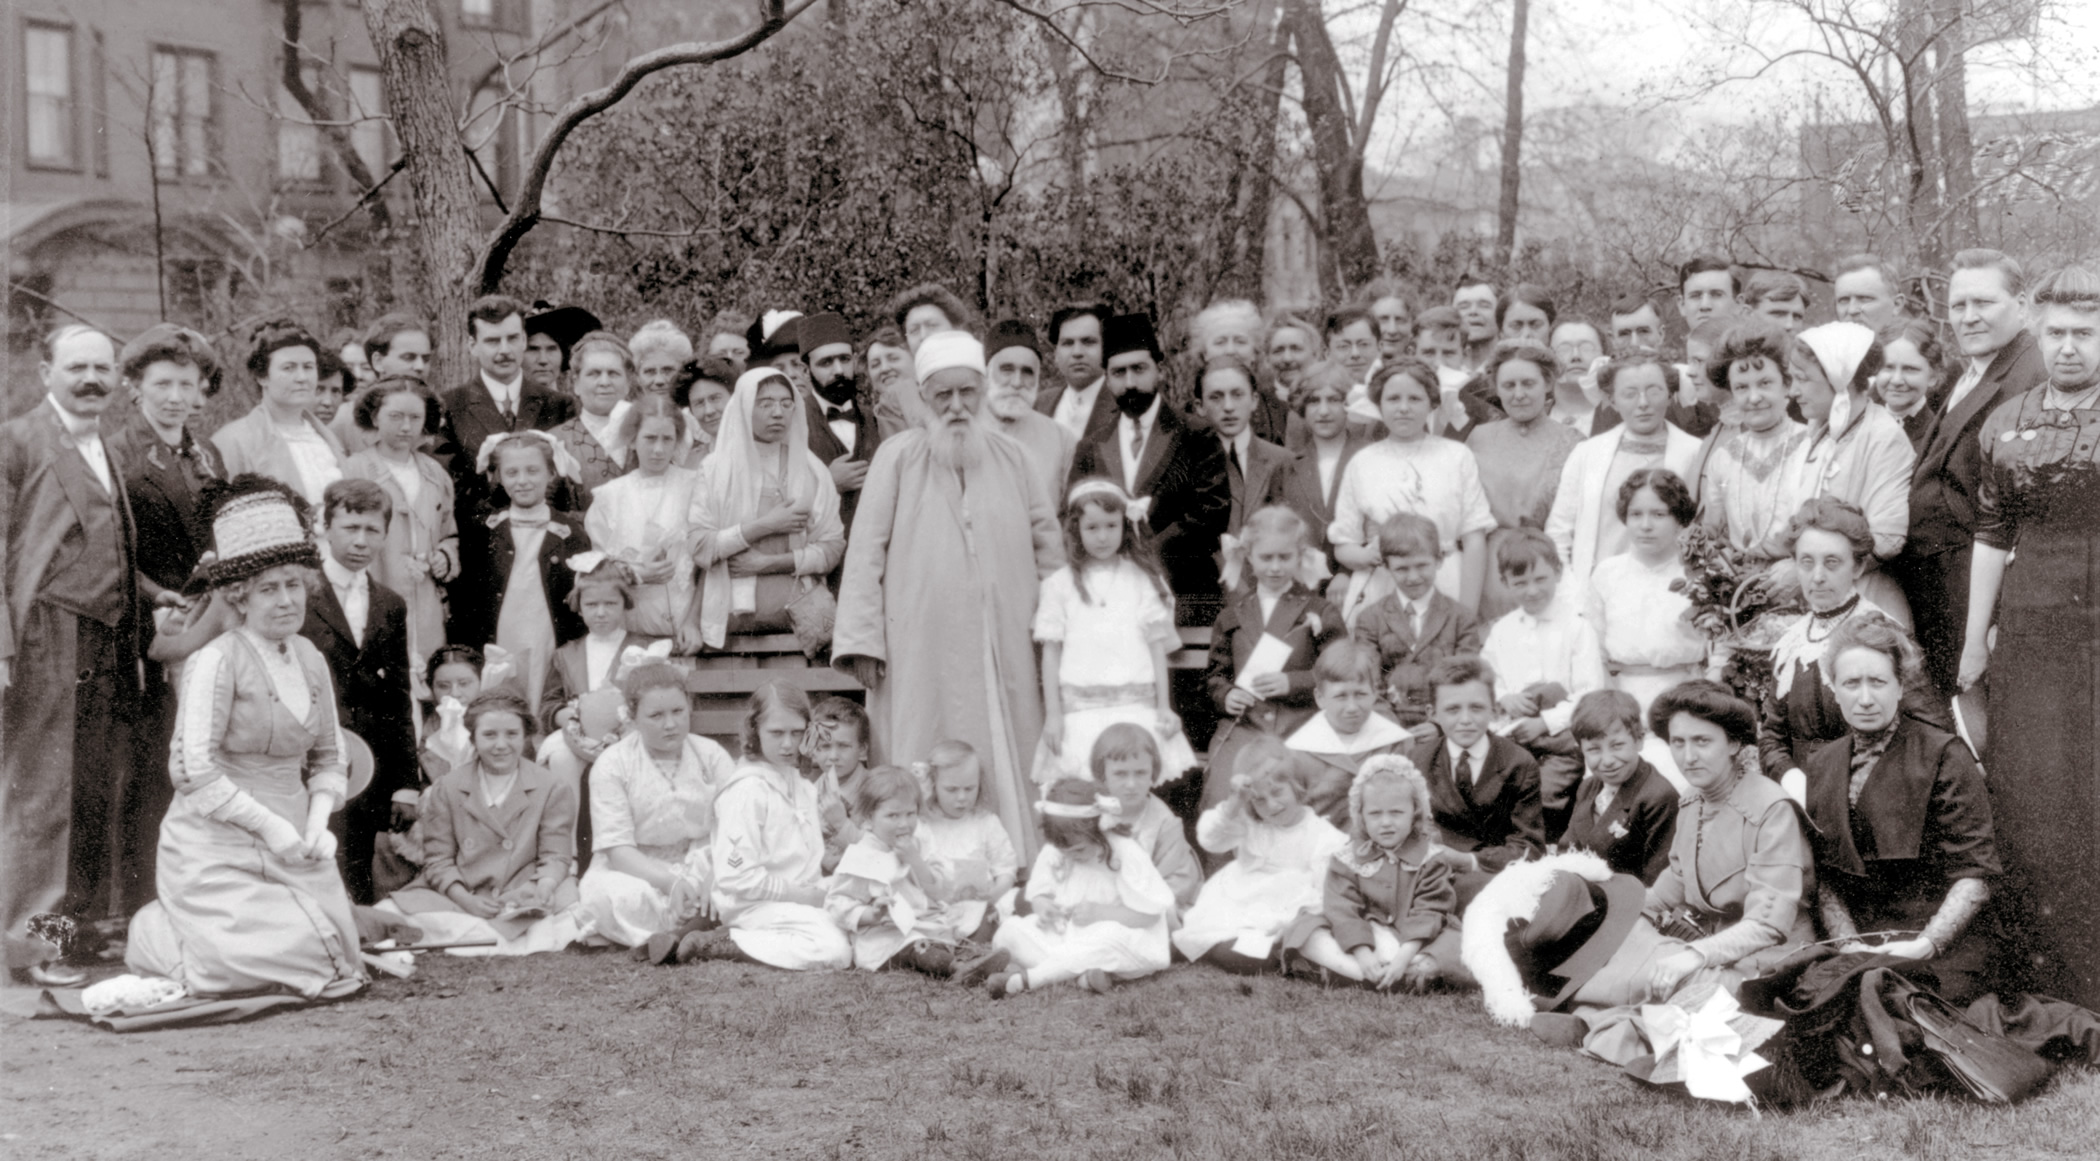 Abdul-Bahá is shown (at center) with Bahaís at Lincoln Park, Chicago, Ill. in 1912.